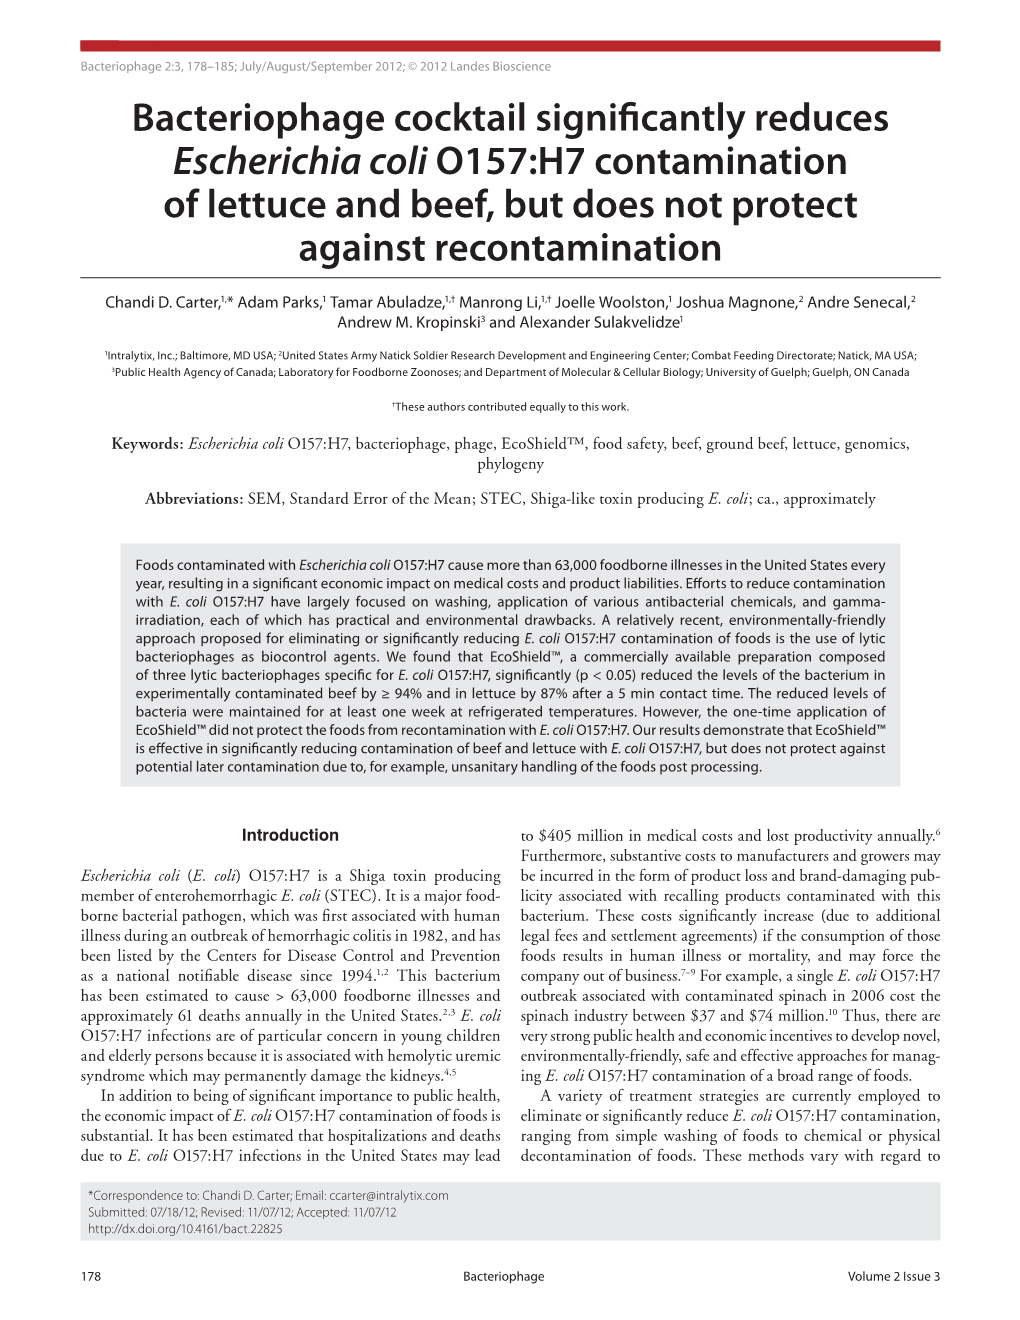 Bacteriophage Cocktail Significantly Reduces Escherichia Coli O157:H7 Contamination of Lettuce and Beef, but Does Not Protect Against Recontamination